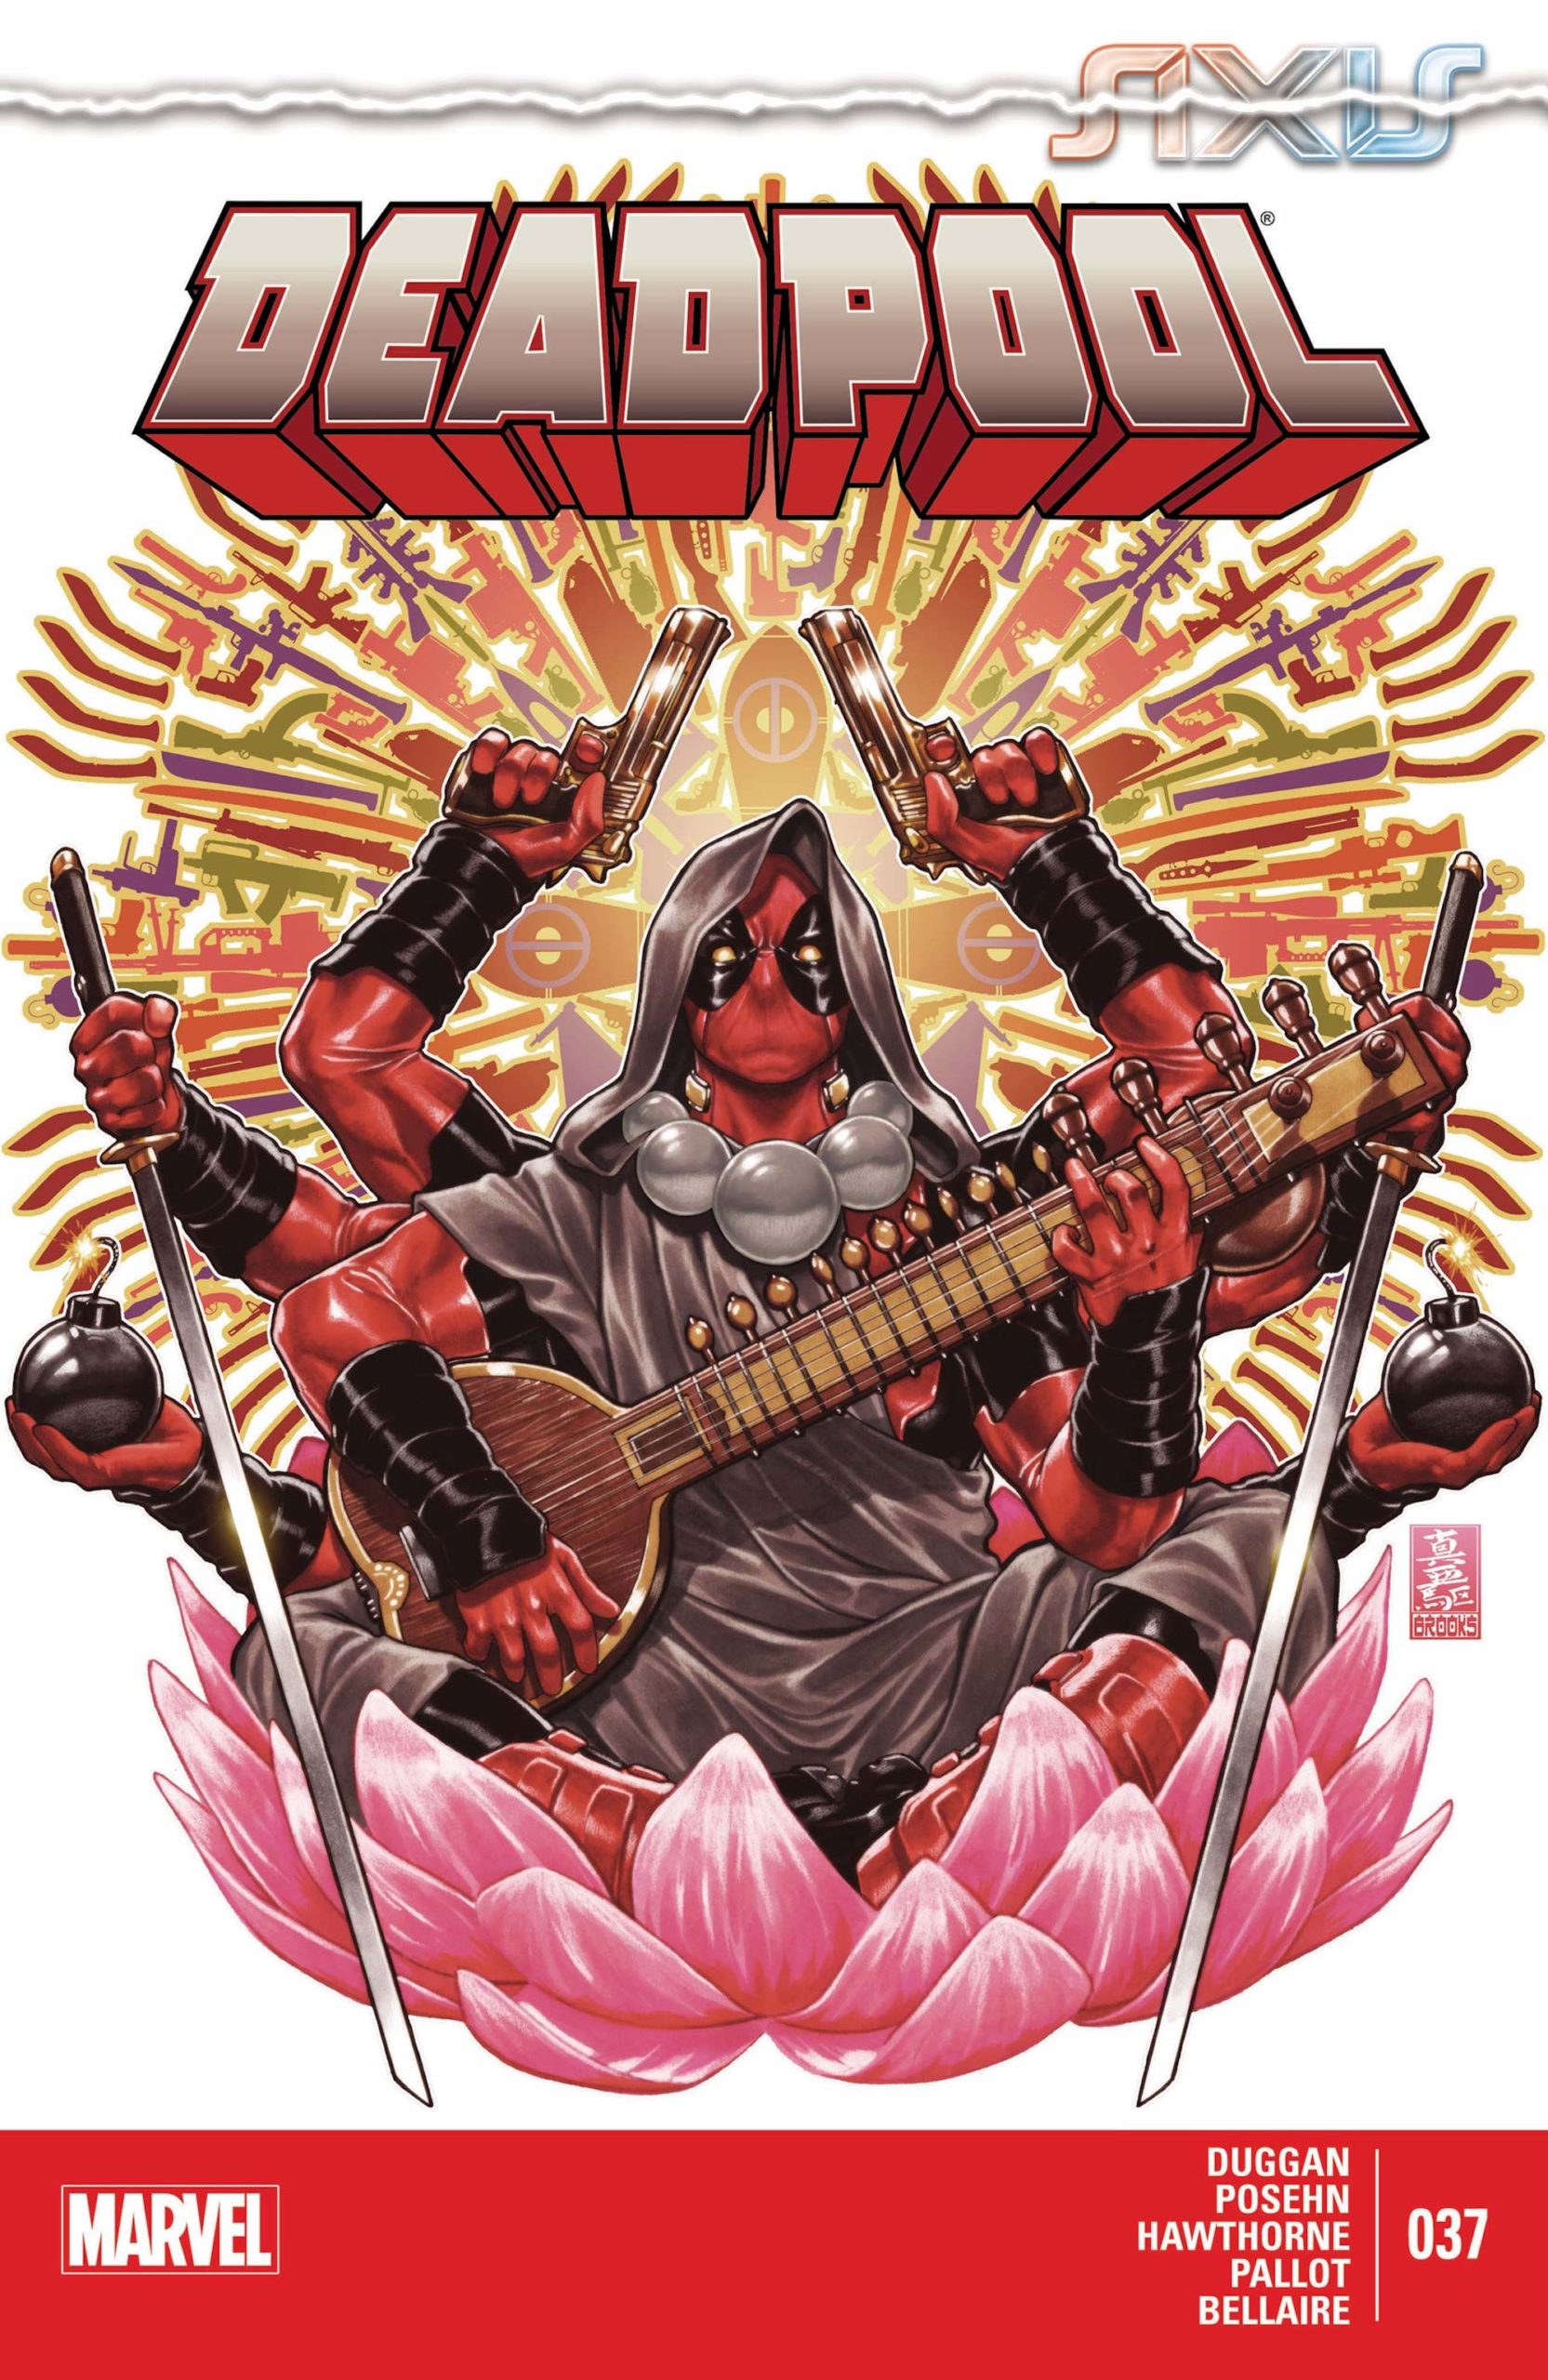 This image is the cover of Deadpool #37 (2012) and shows a new enlightened version of the character of Deadpool. 